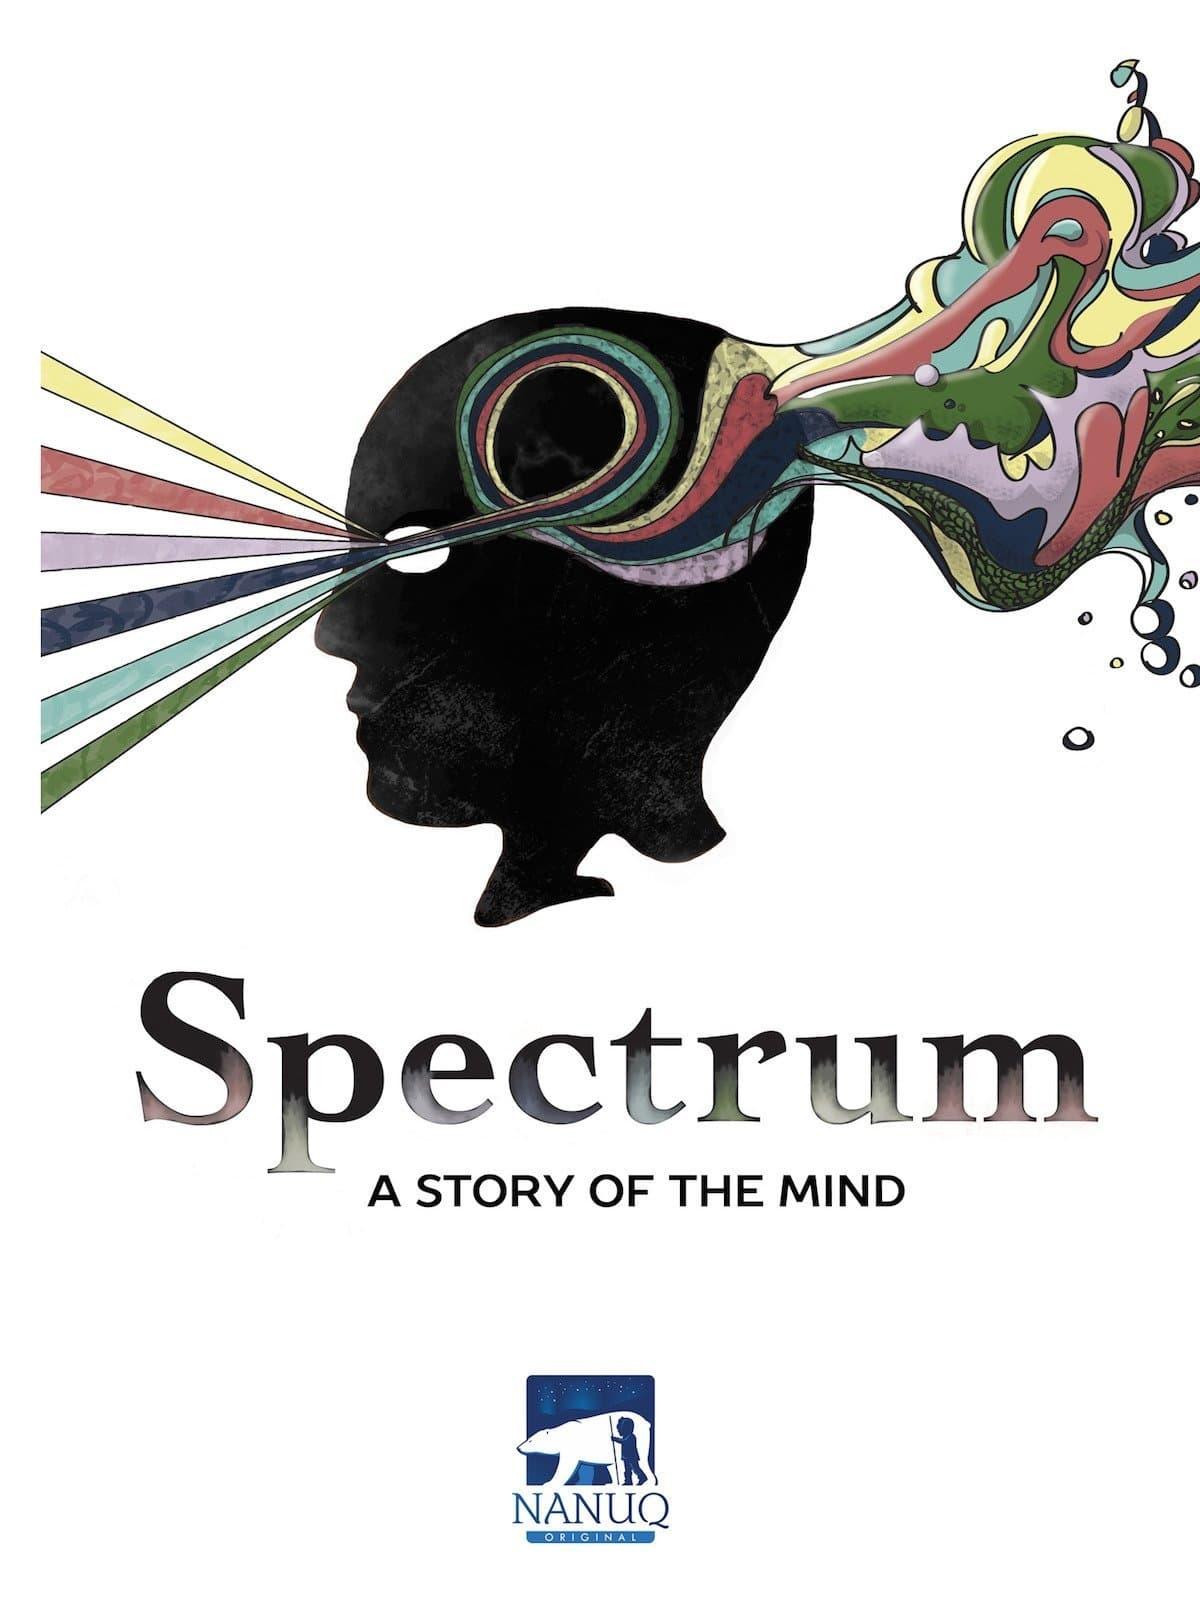 Spectrum: A Story of the Mind poster